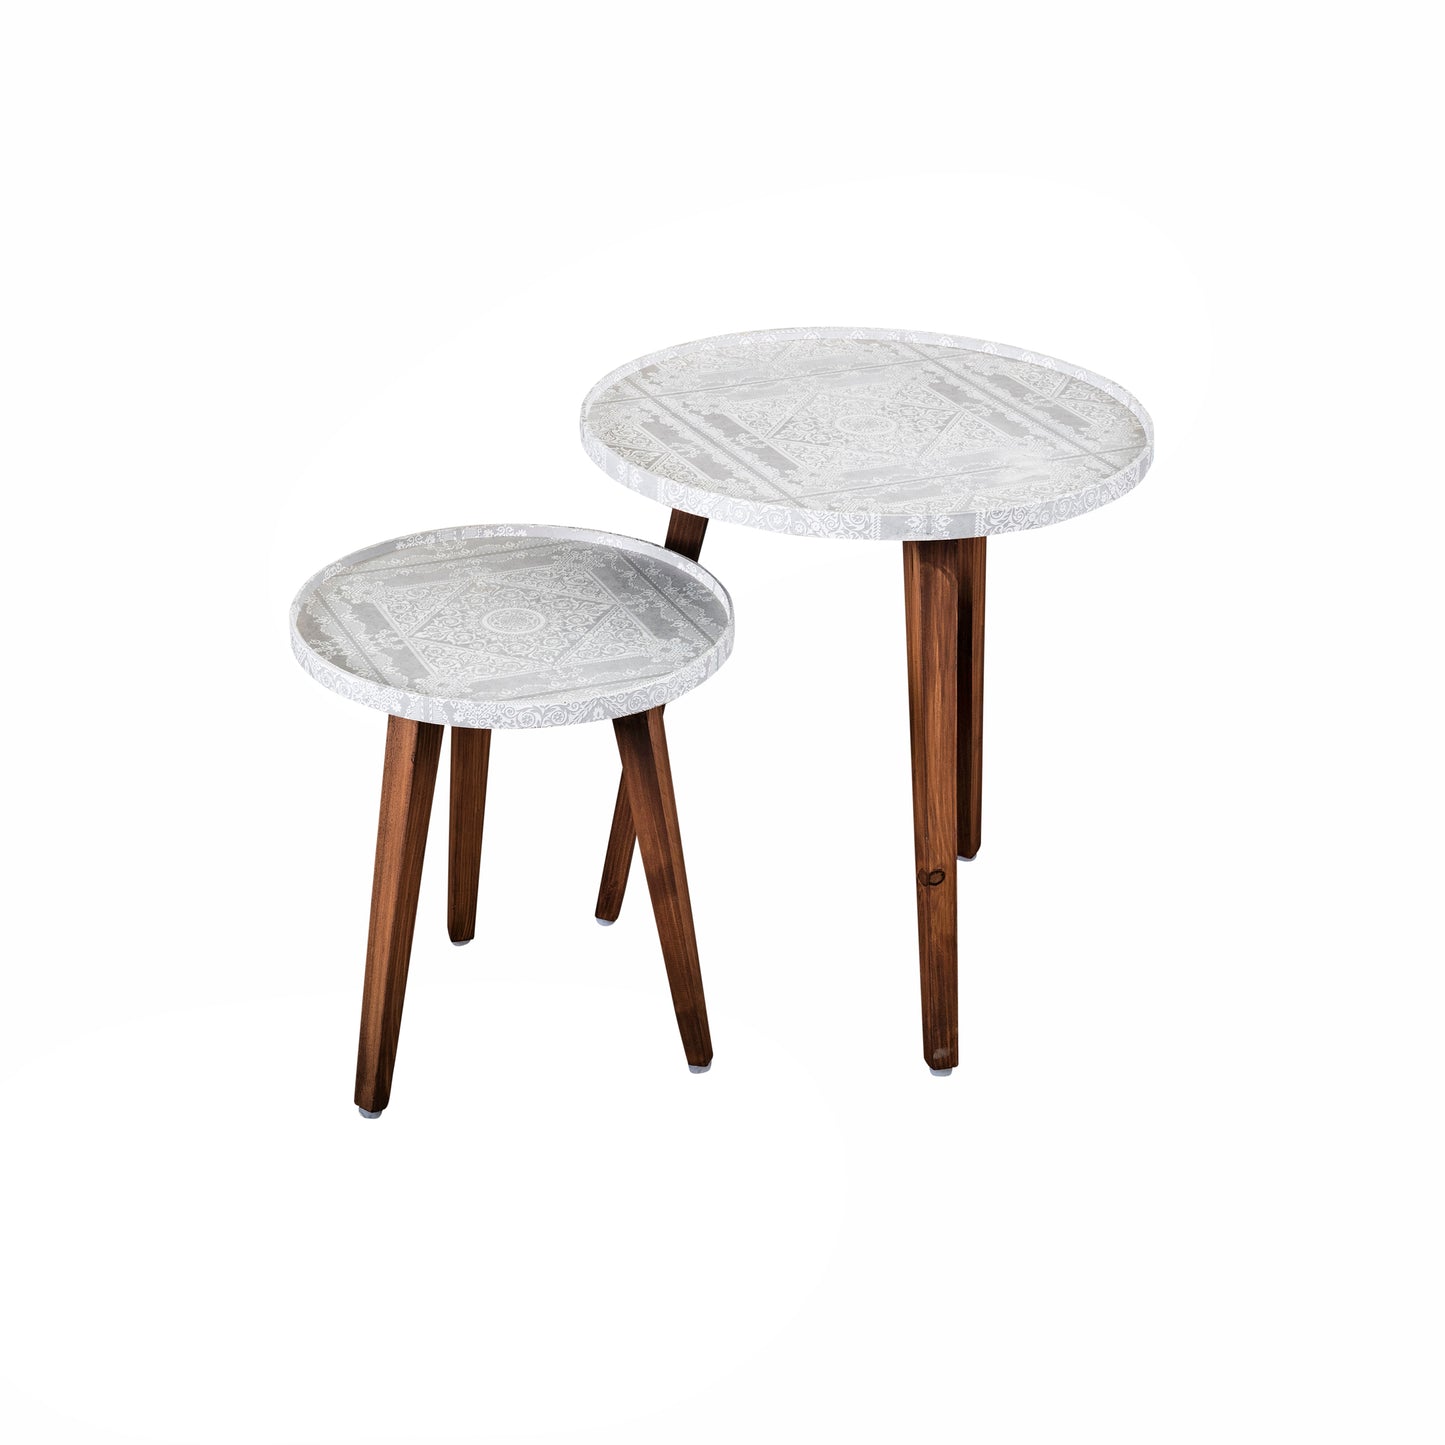 A Tiny Mistake Kaarigari Wooden Nesting Tables (Set of 2), Living Room Decor